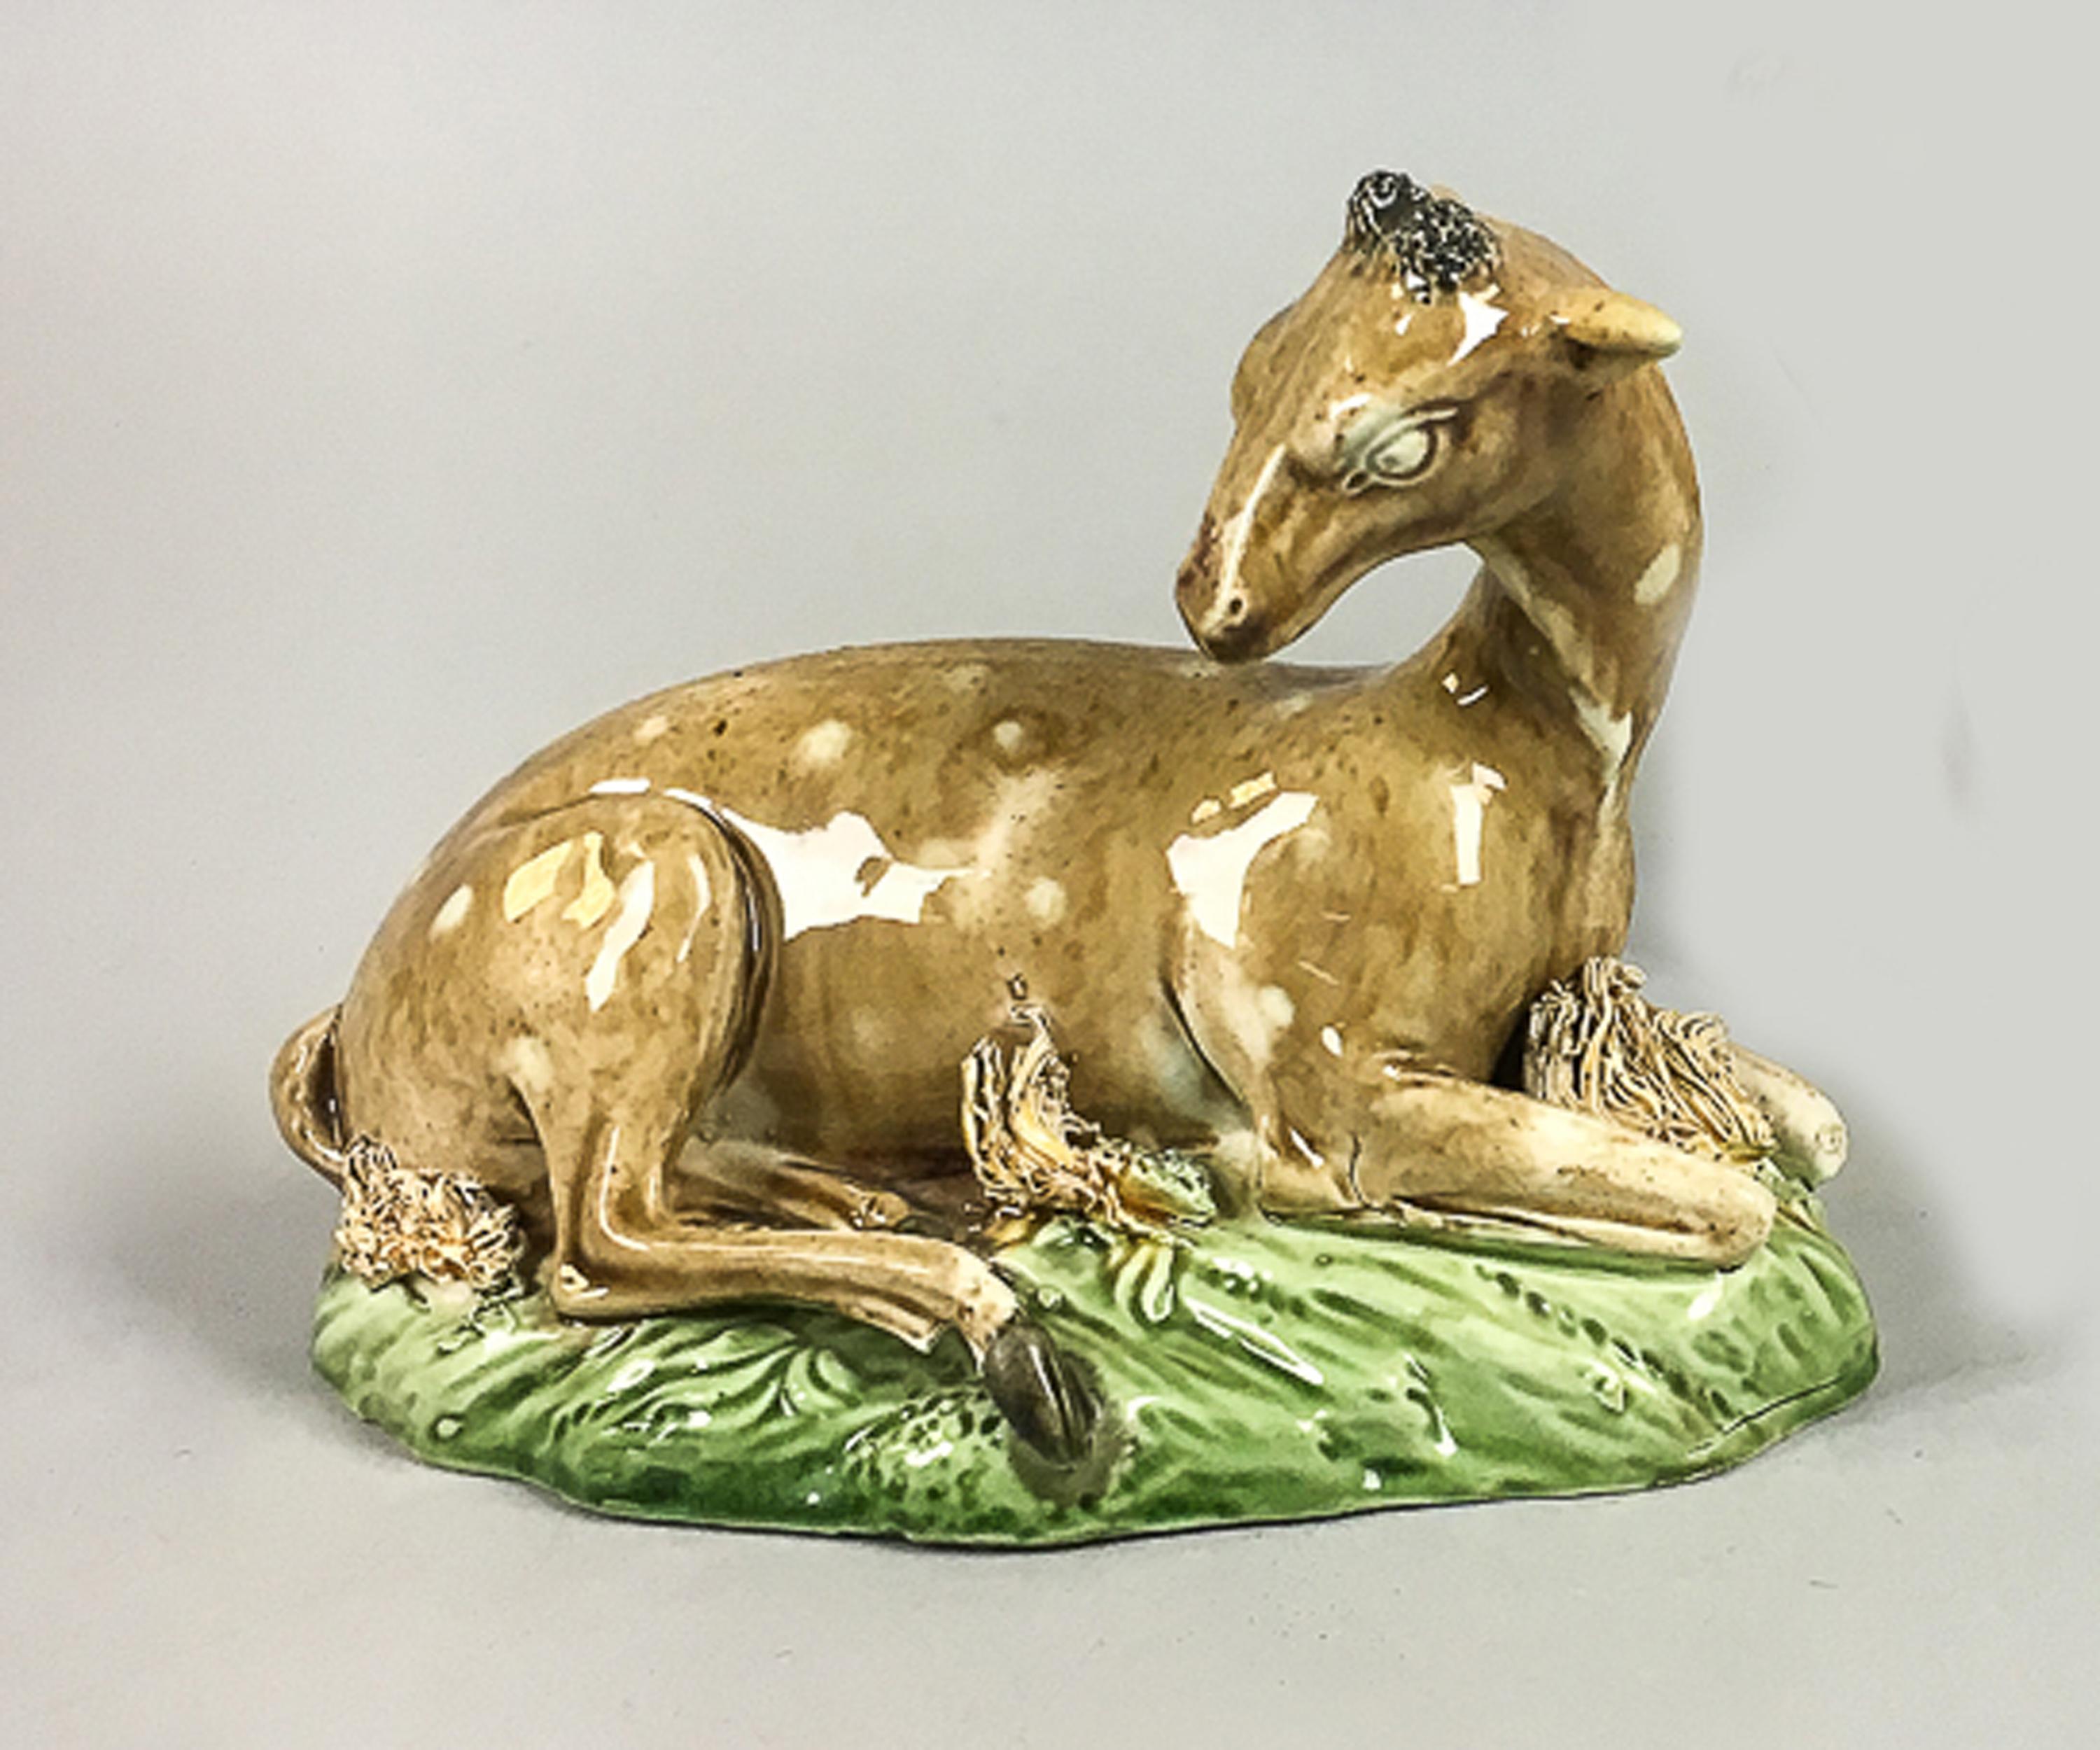 Lead-glazed earthenware model figure of A Doe, circa 1785,
Perhaps John Wood of Brownhills or Ralph & Enoch Wood of Burslem,

The pearlware figure of a hind is press-moulded and sits on a domed hollow mould with clay threads imitating grass. The